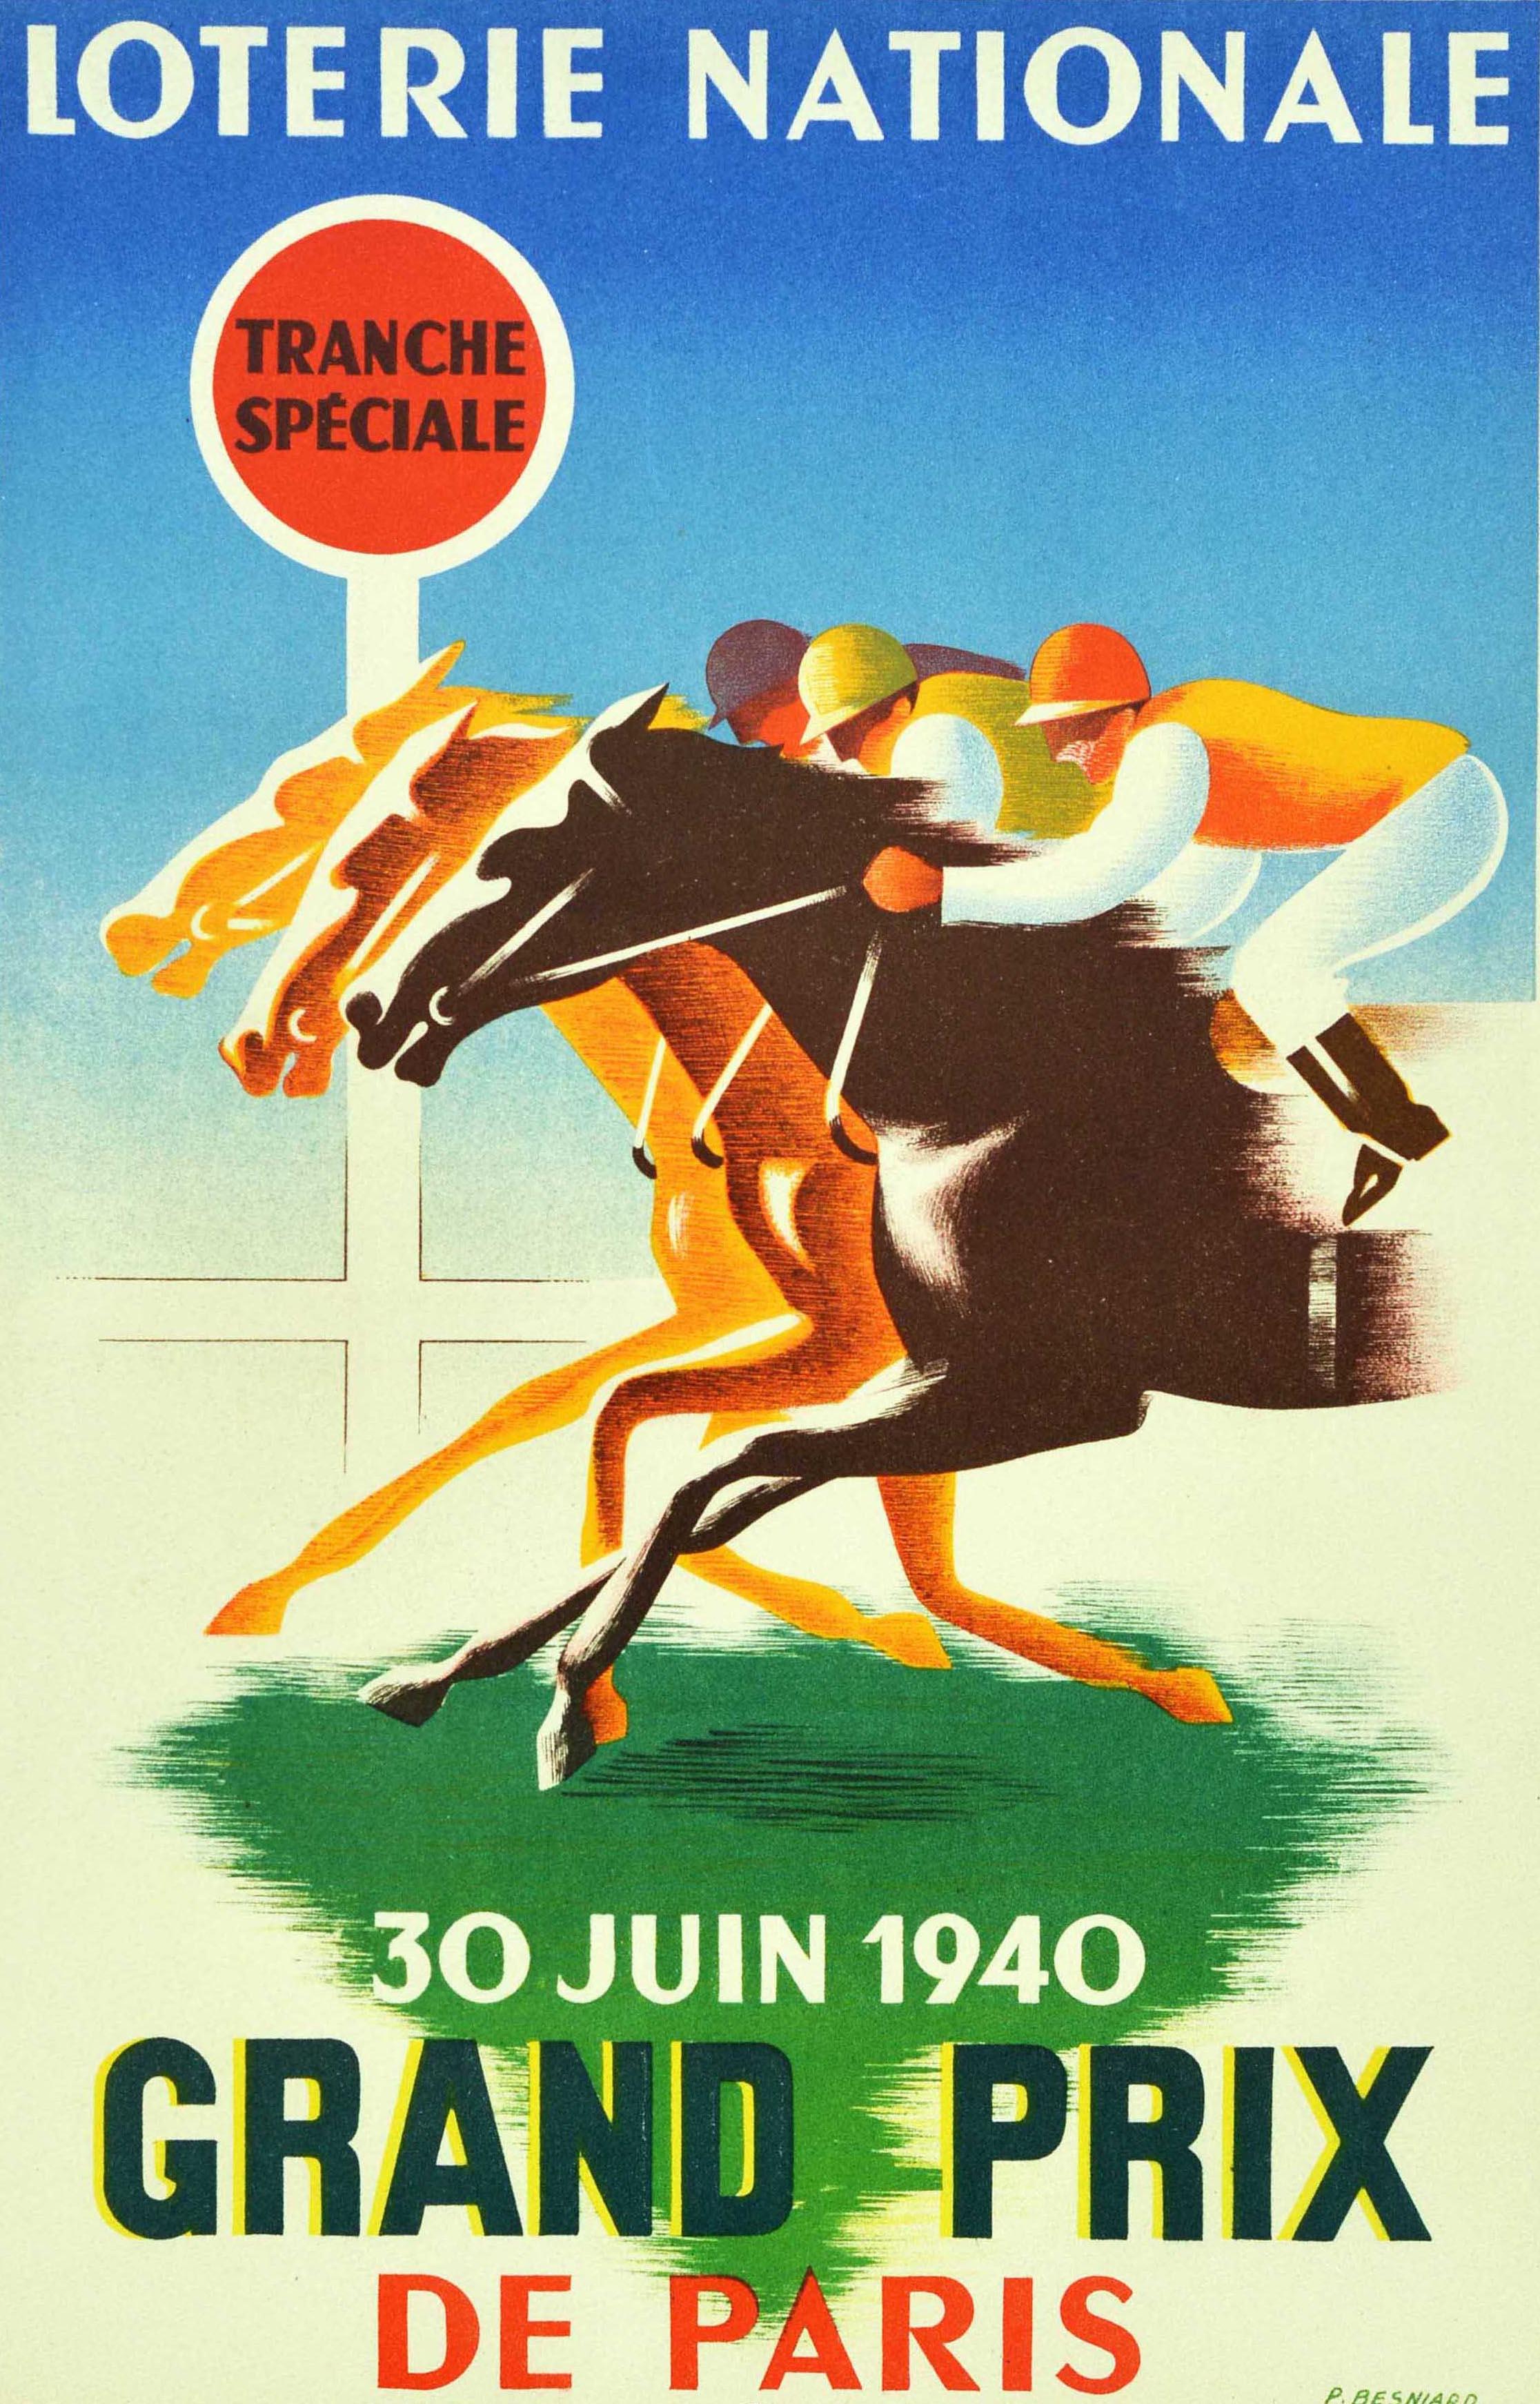 Original Vintage Advertising Poster Loterie Nationale Grand Prix Horse Racing - Print by Pierre Besniard